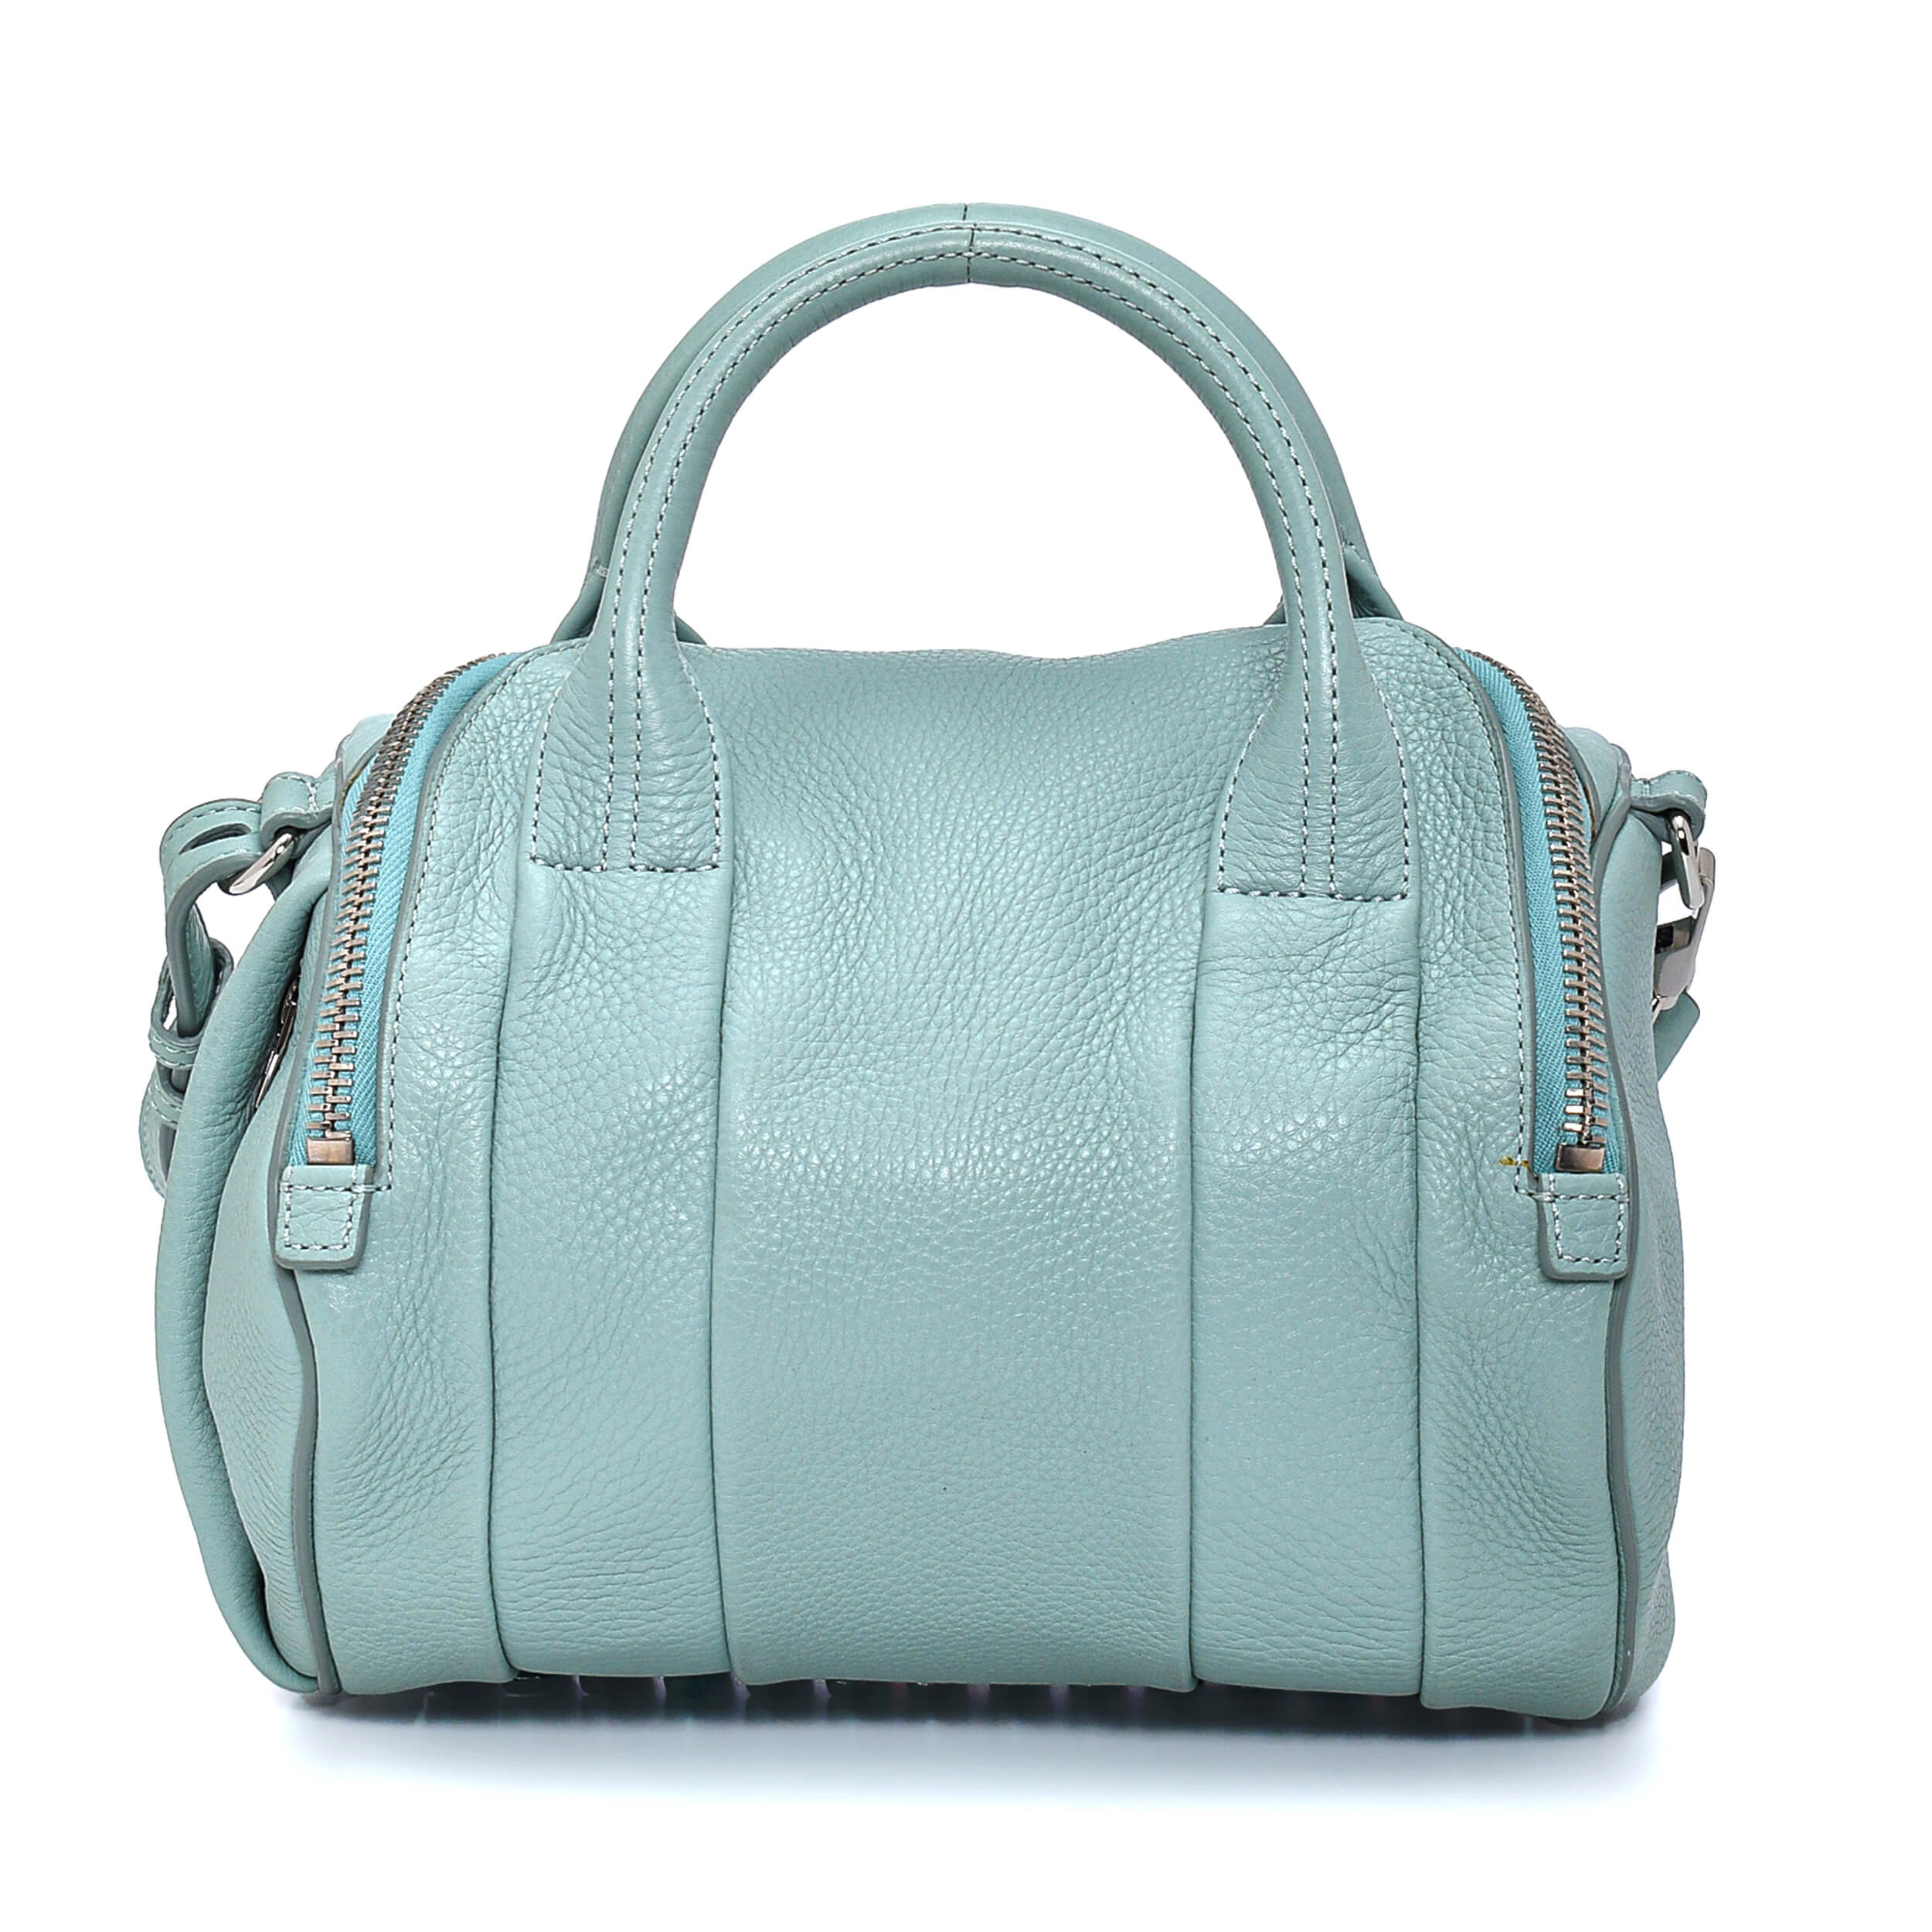 Alexander Wang - Turquoise Leather Small Rockie Bag